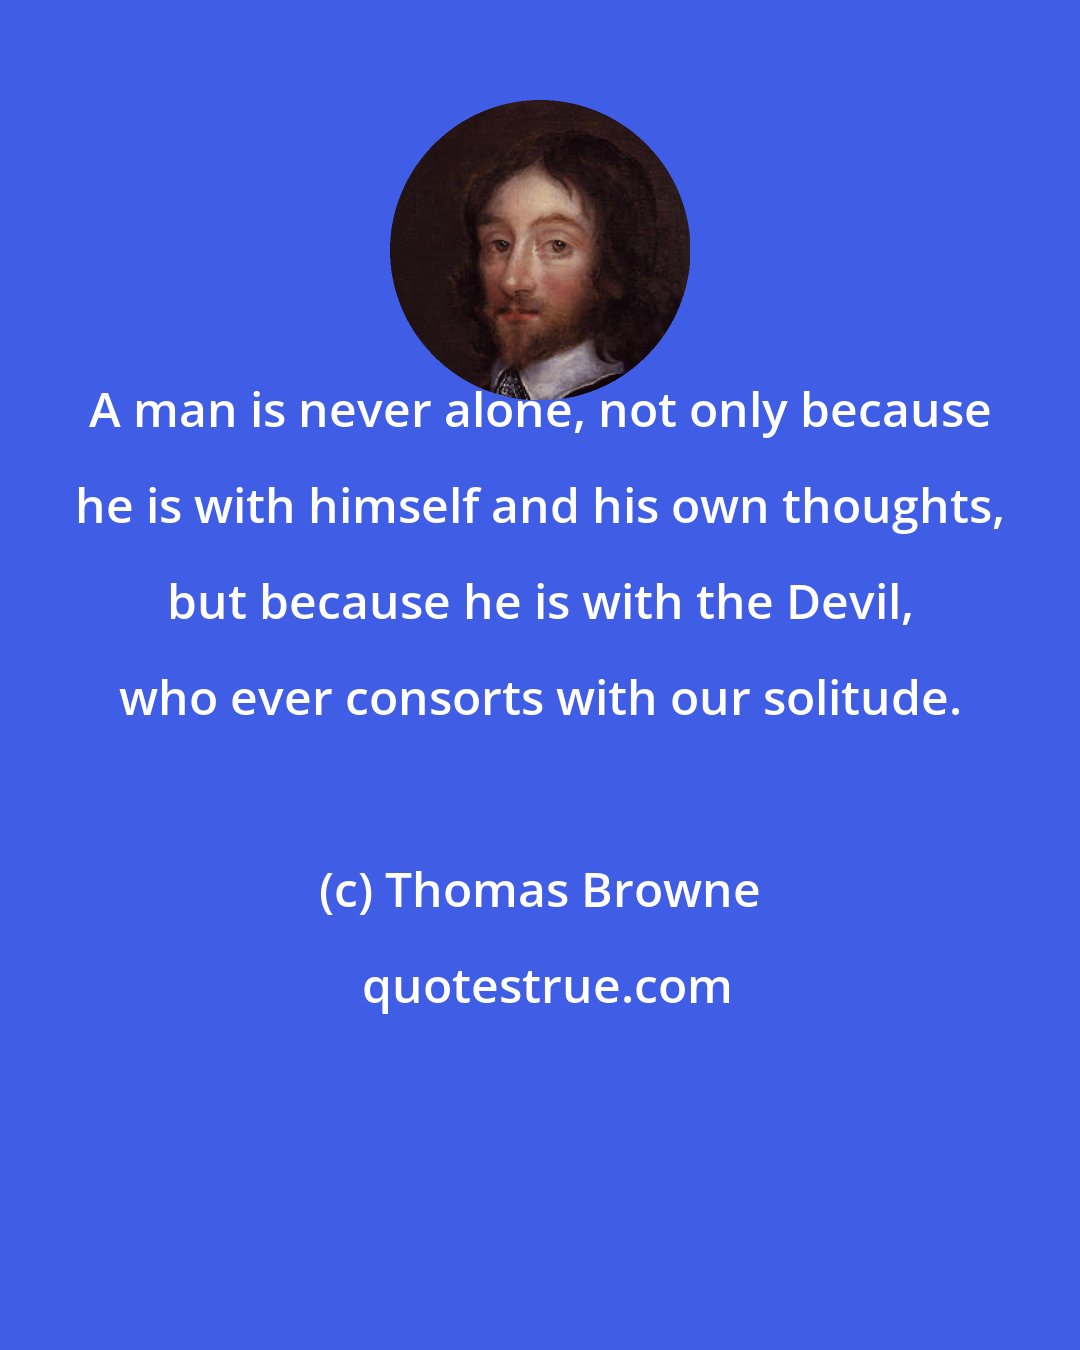 Thomas Browne: A man is never alone, not only because he is with himself and his own thoughts, but because he is with the Devil, who ever consorts with our solitude.